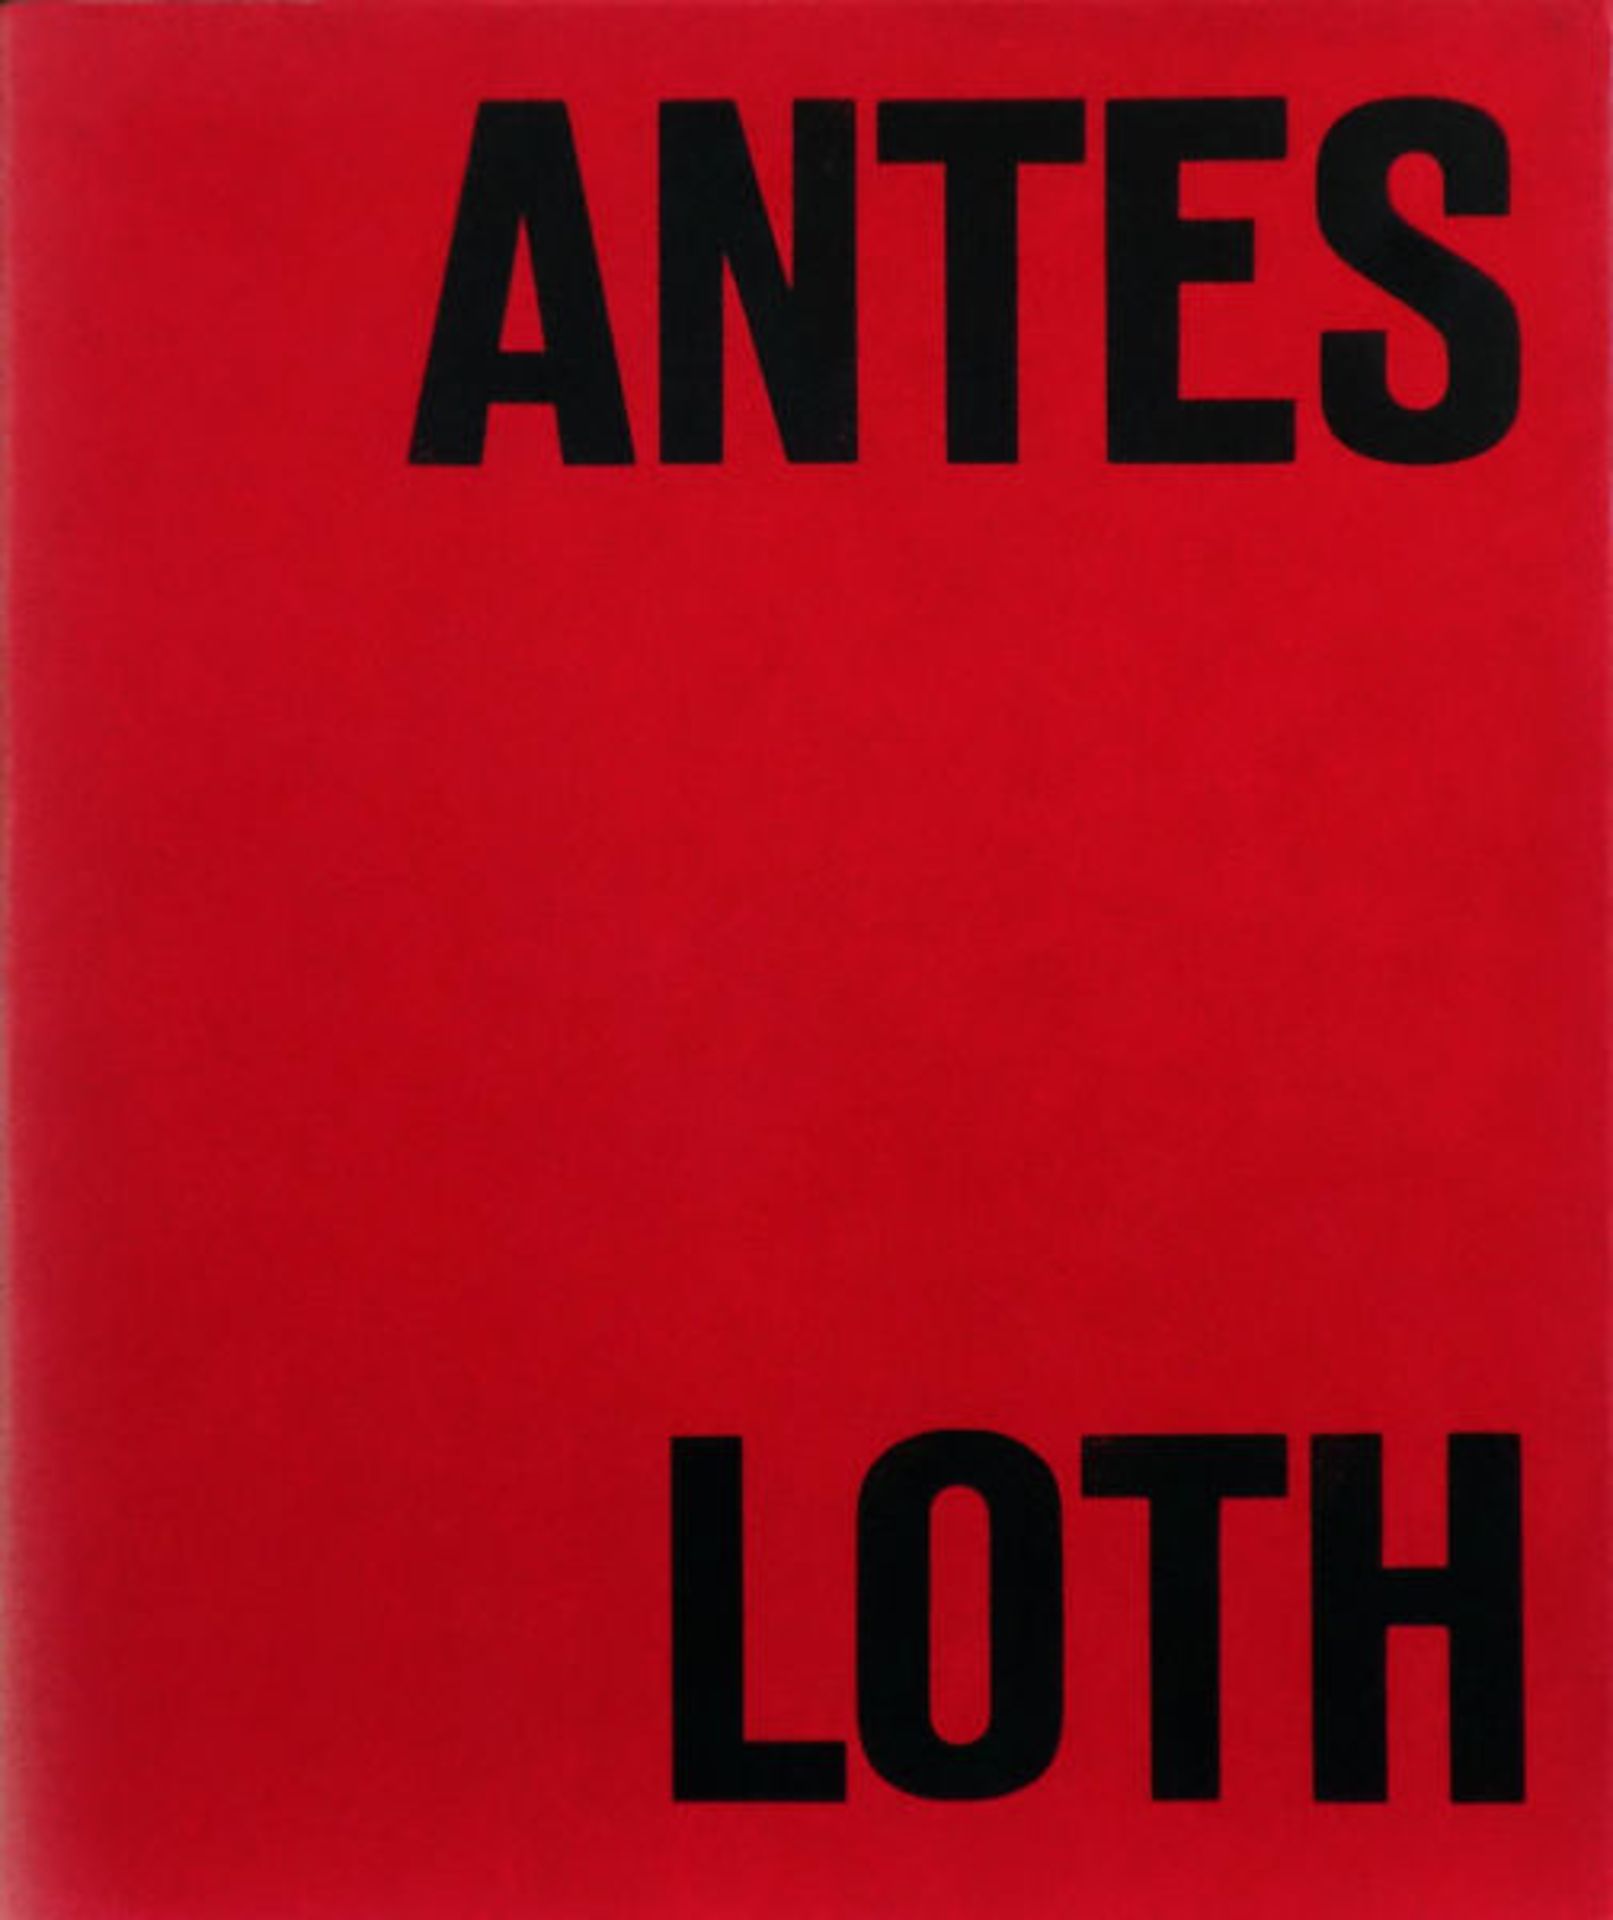 Antes - Loth (1975)Issue for the exhibition "Antes-Loth" in der Galerie Altes Theater, Ravensburg